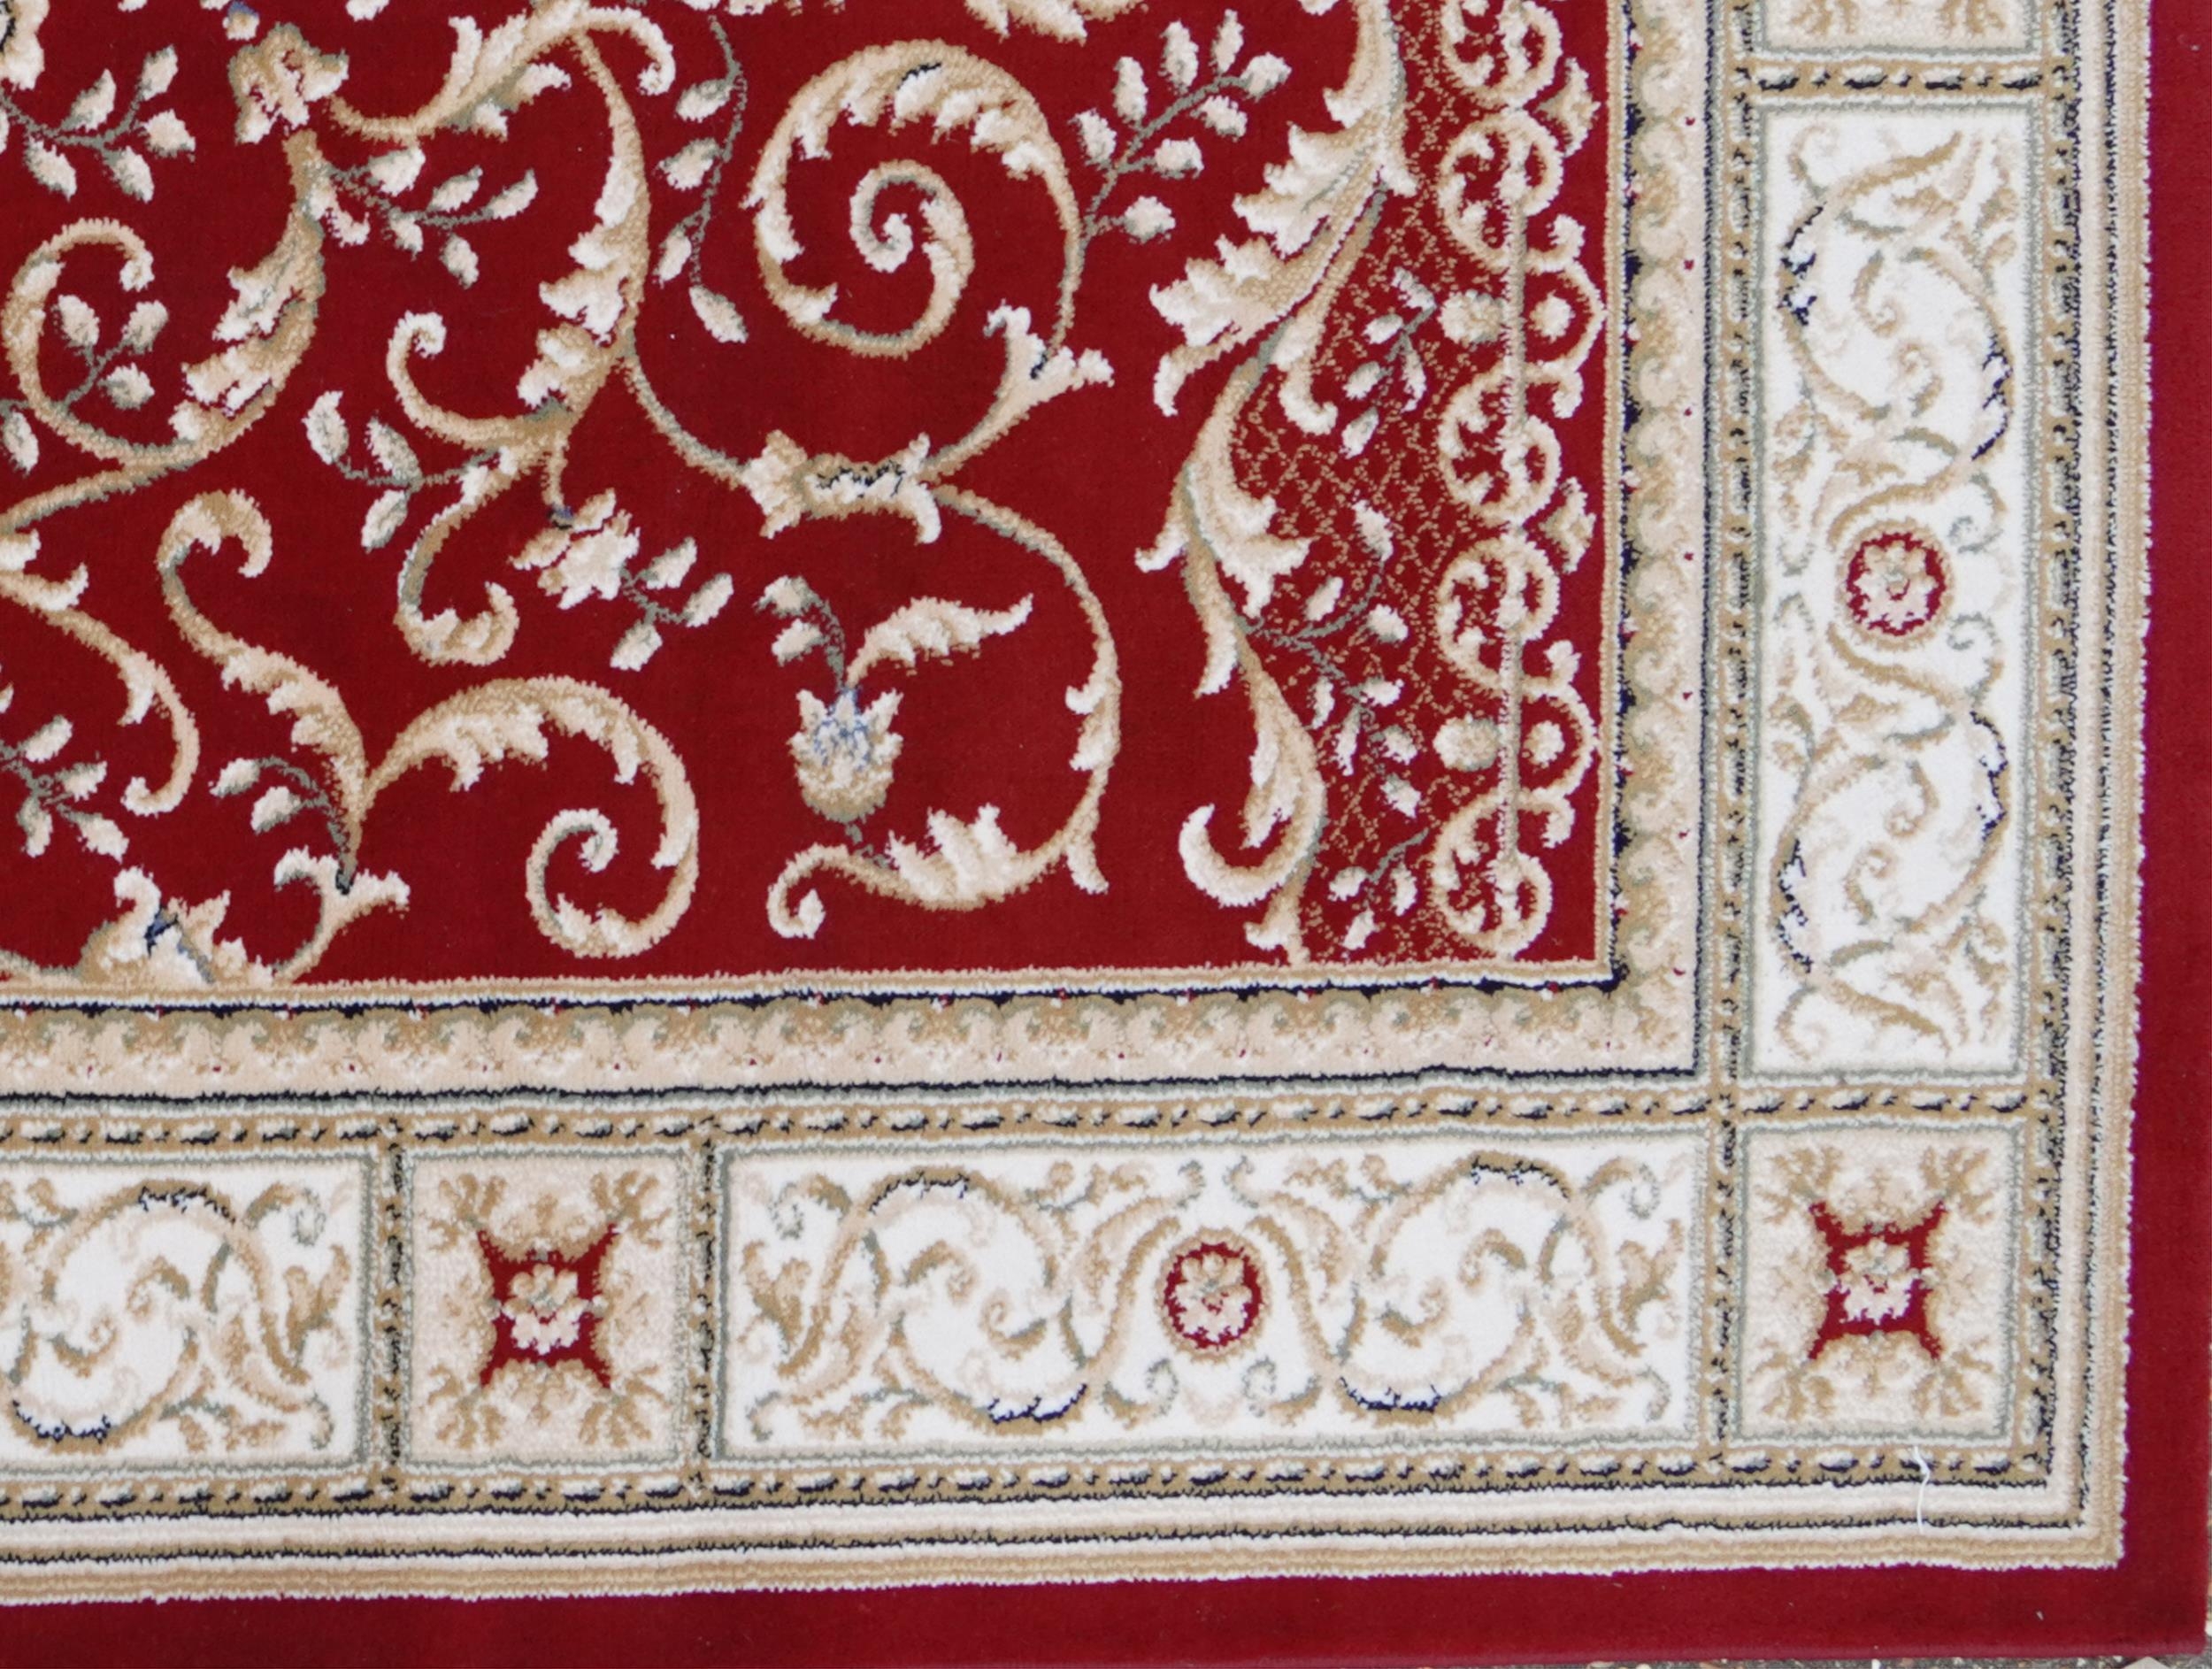 Rectangular red and cream ground floral rug, 230cm x 160cm - Image 3 of 7